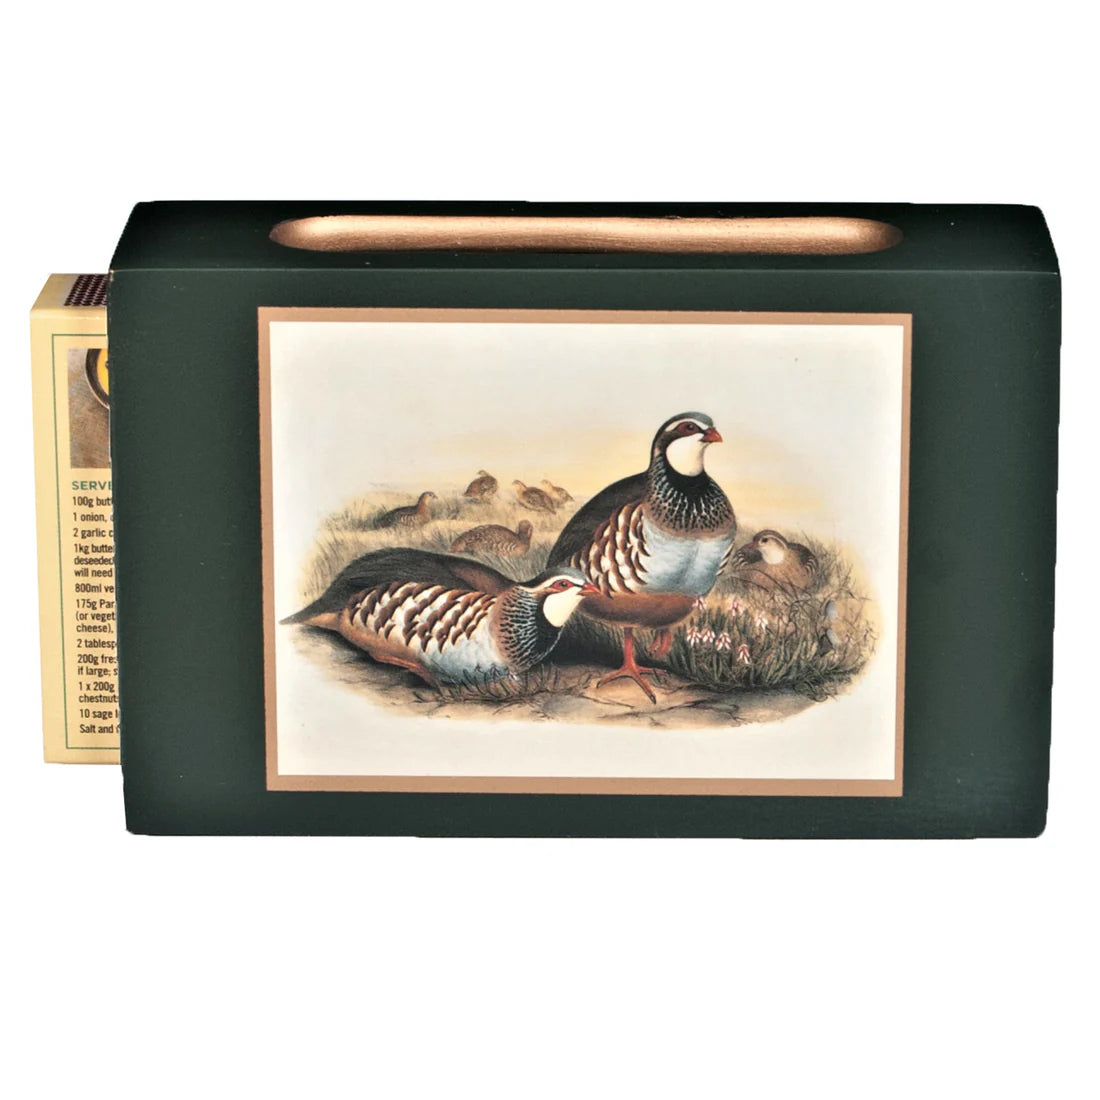 Standard Wooden Matchbox Cover with Matches: Partridge on Red